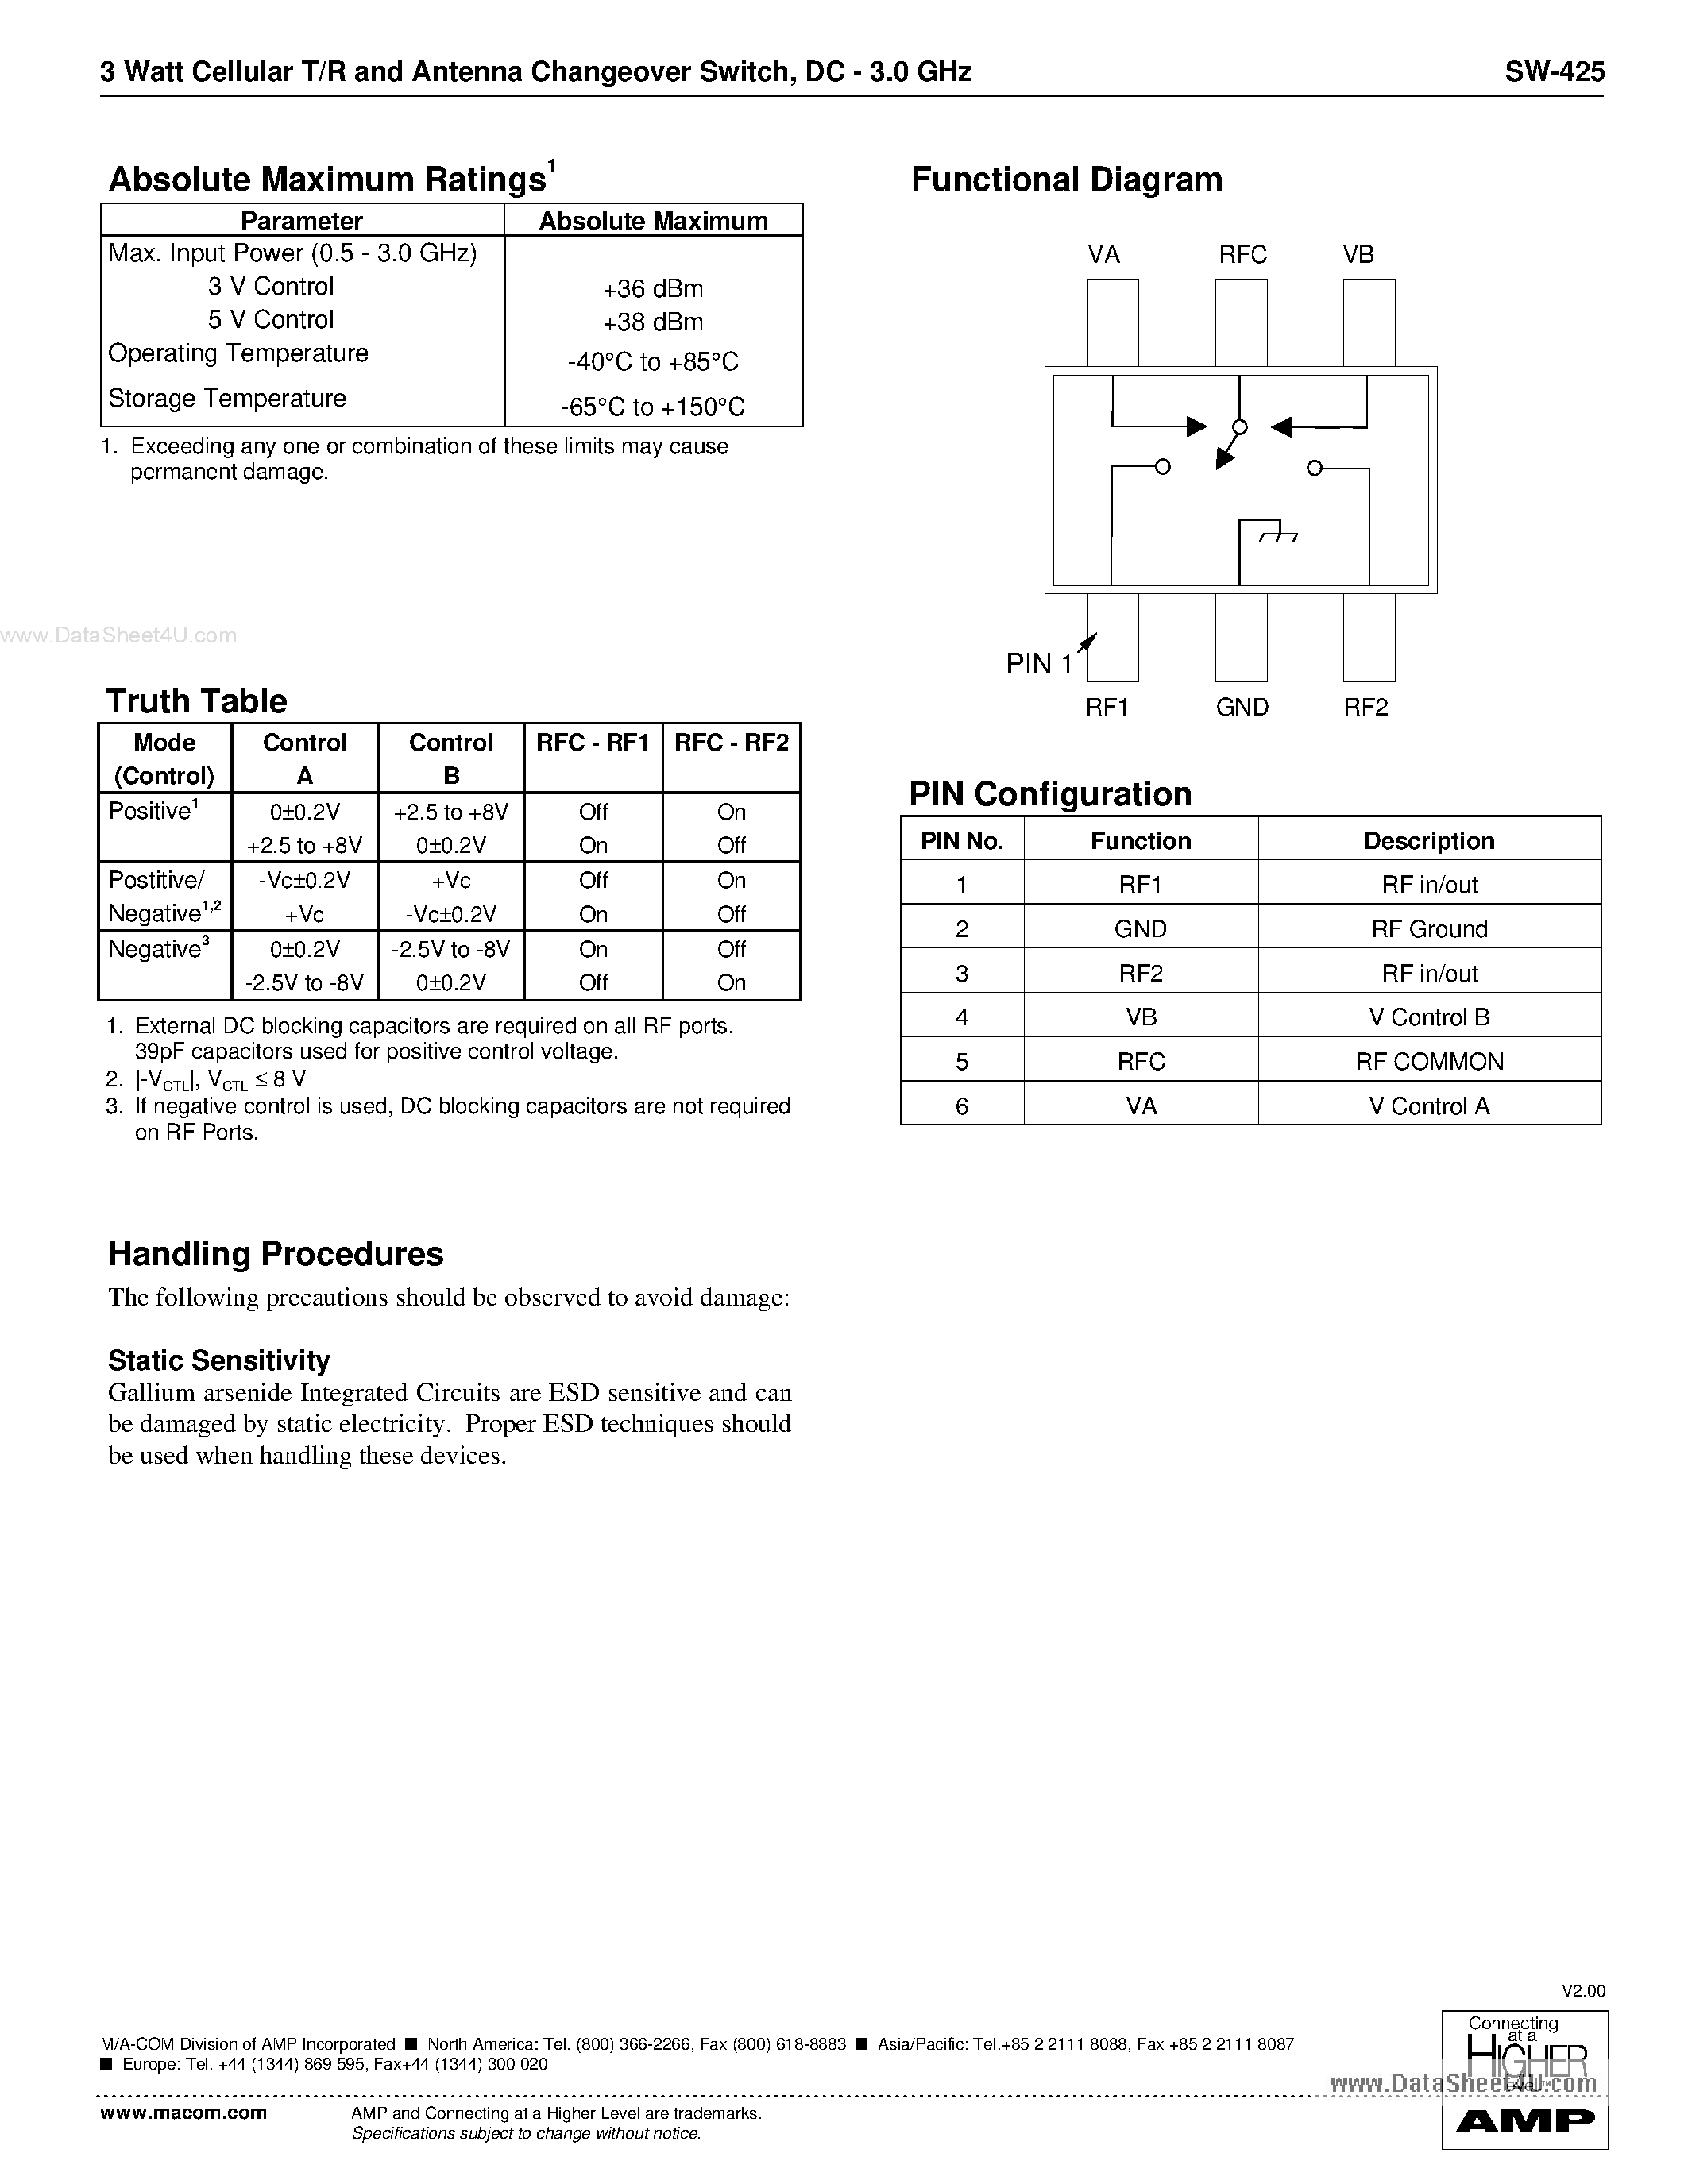 Datasheet SW425 - 3 Watt Cellular T/R and Antenna Changeover Switch page 2